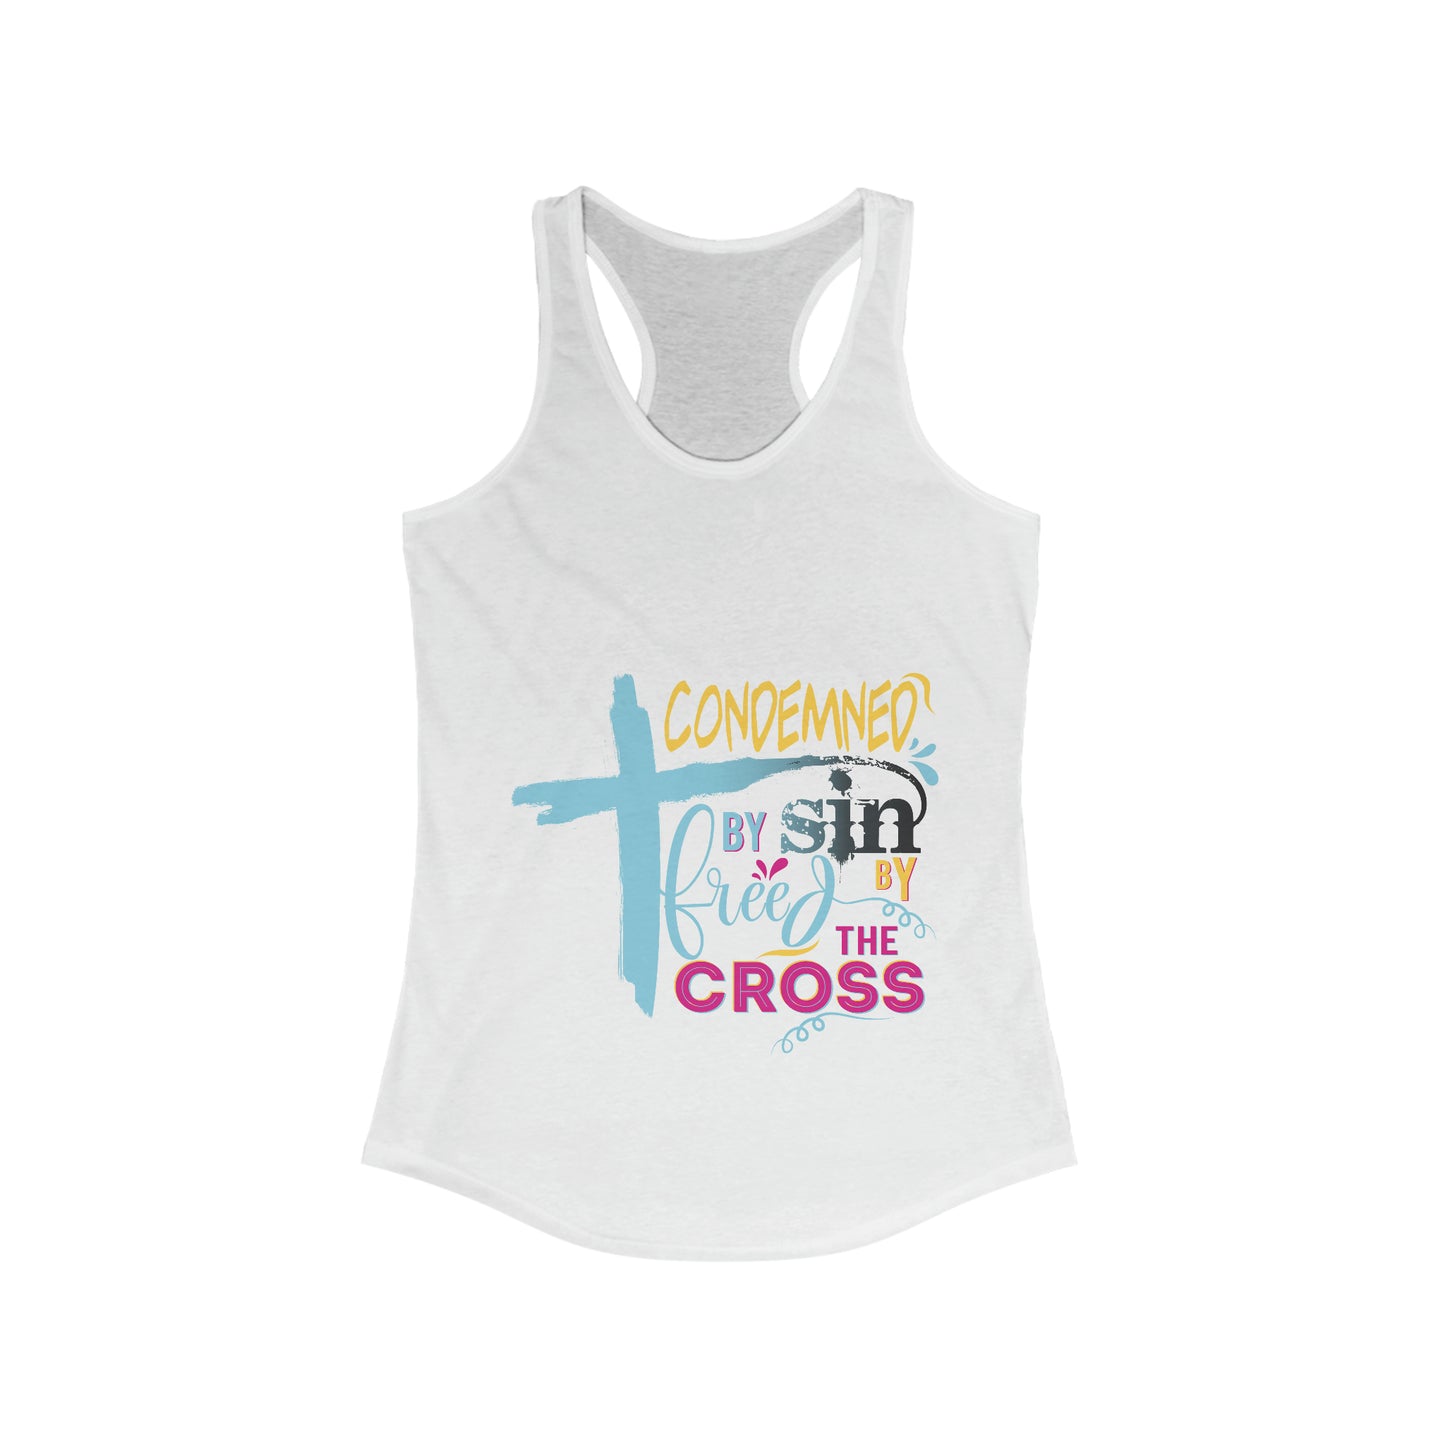 Condemned by Sin Freed By The Cross slim fit tank-top